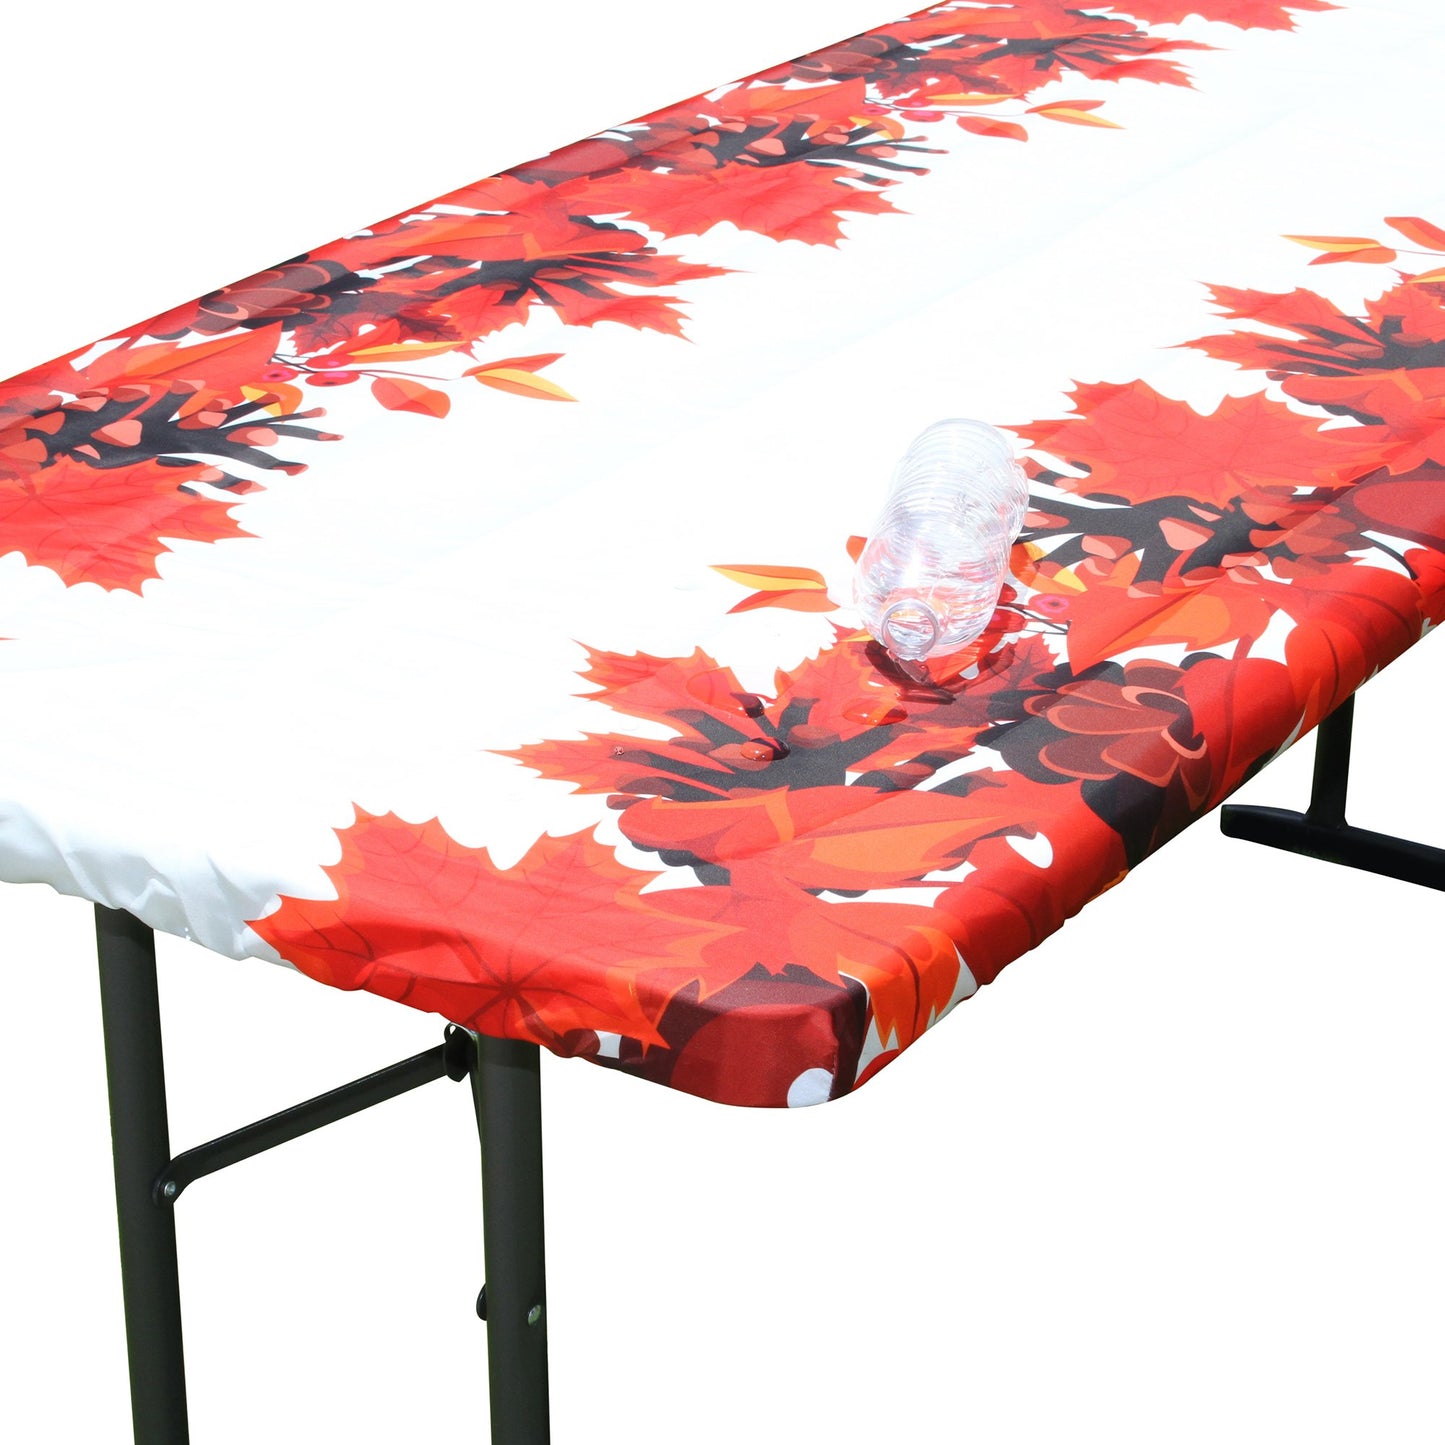 Water beading up on the water resistant surface of TableCloth PLUS 72" Fall Fitted Polyester Tablecloth for 6' Folding Tables